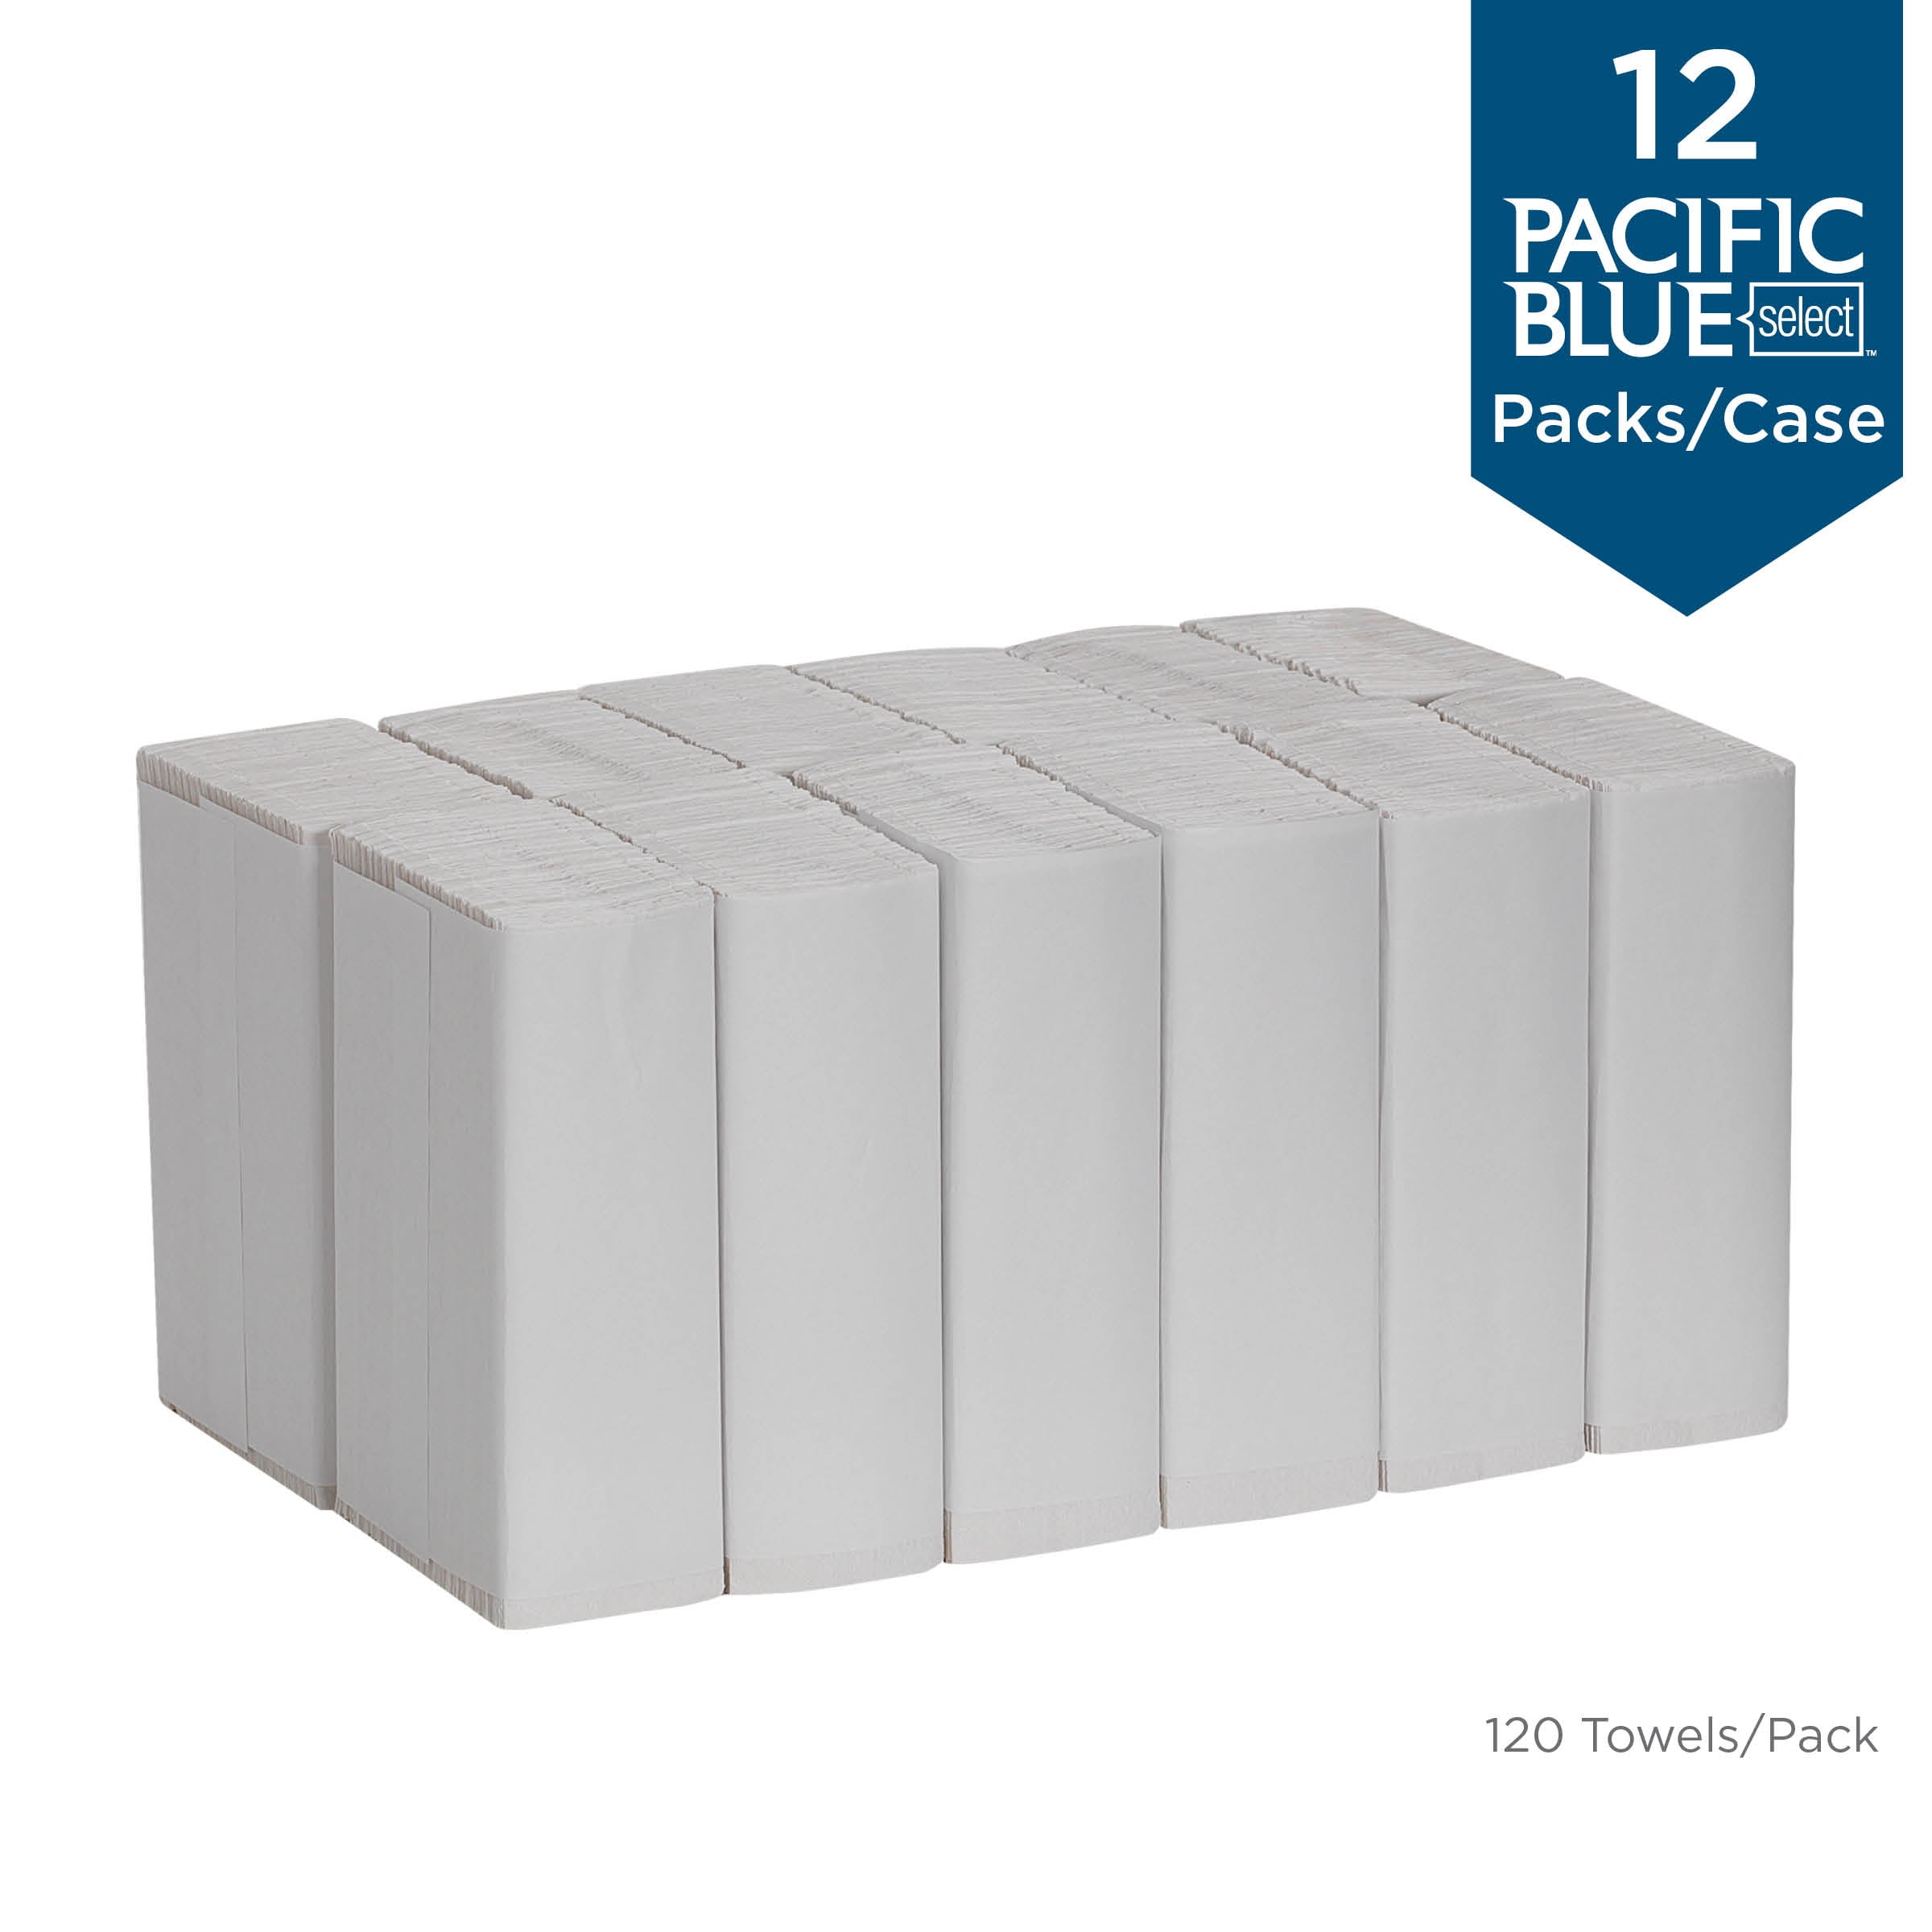 7680 Towels 3 boxes Blue C Fold 1ply Paper Hand Towels 